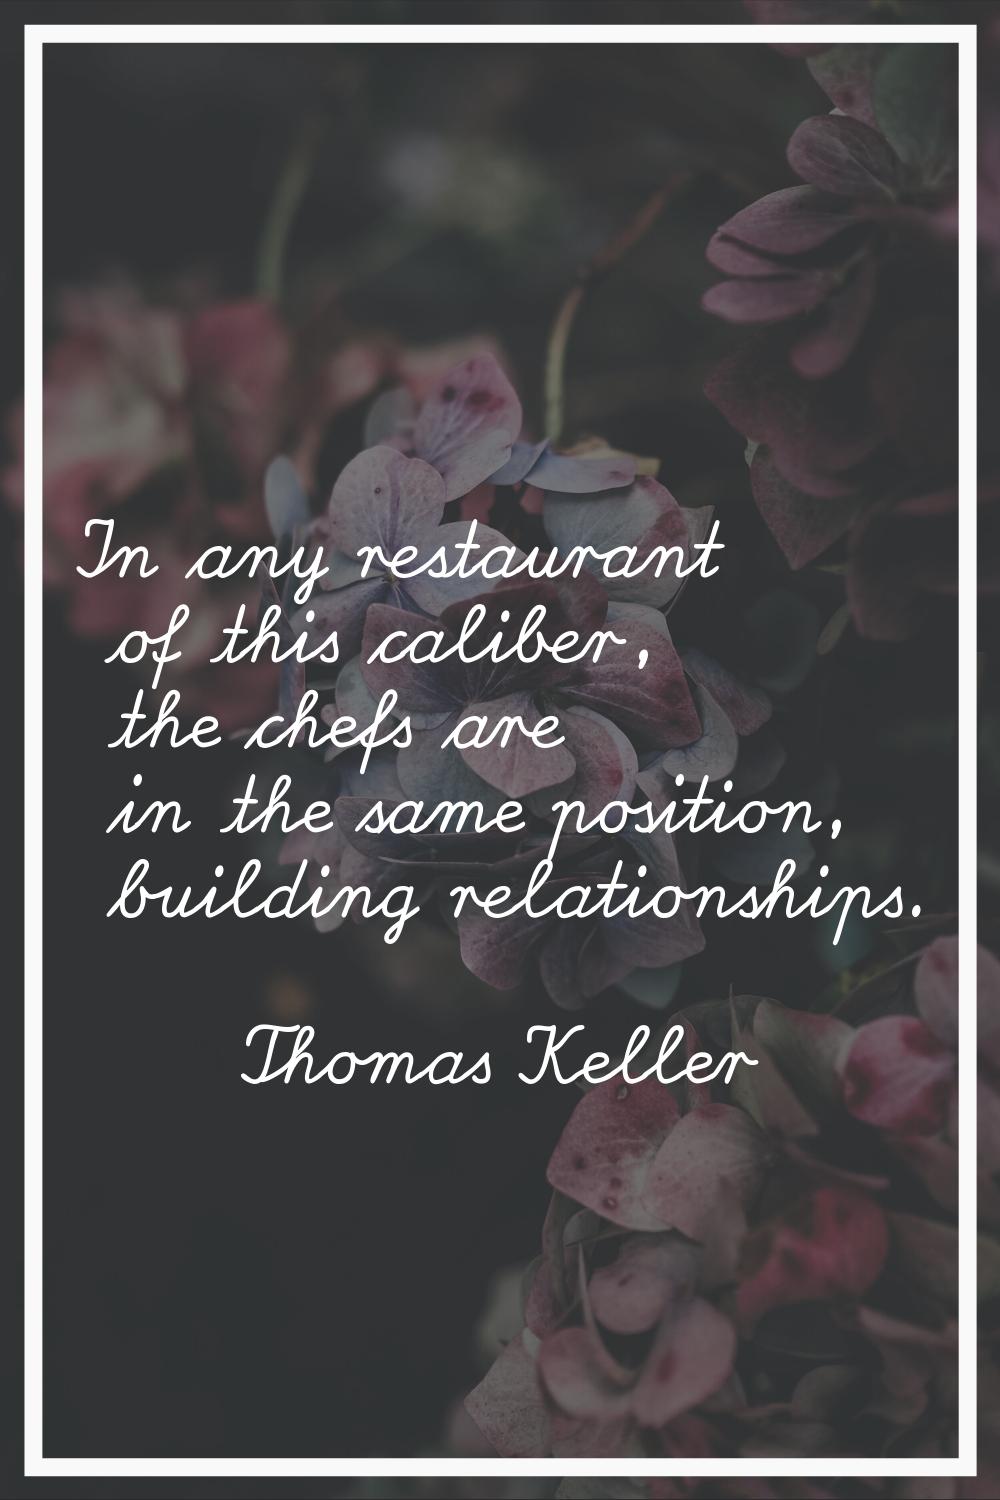 In any restaurant of this caliber, the chefs are in the same position, building relationships.